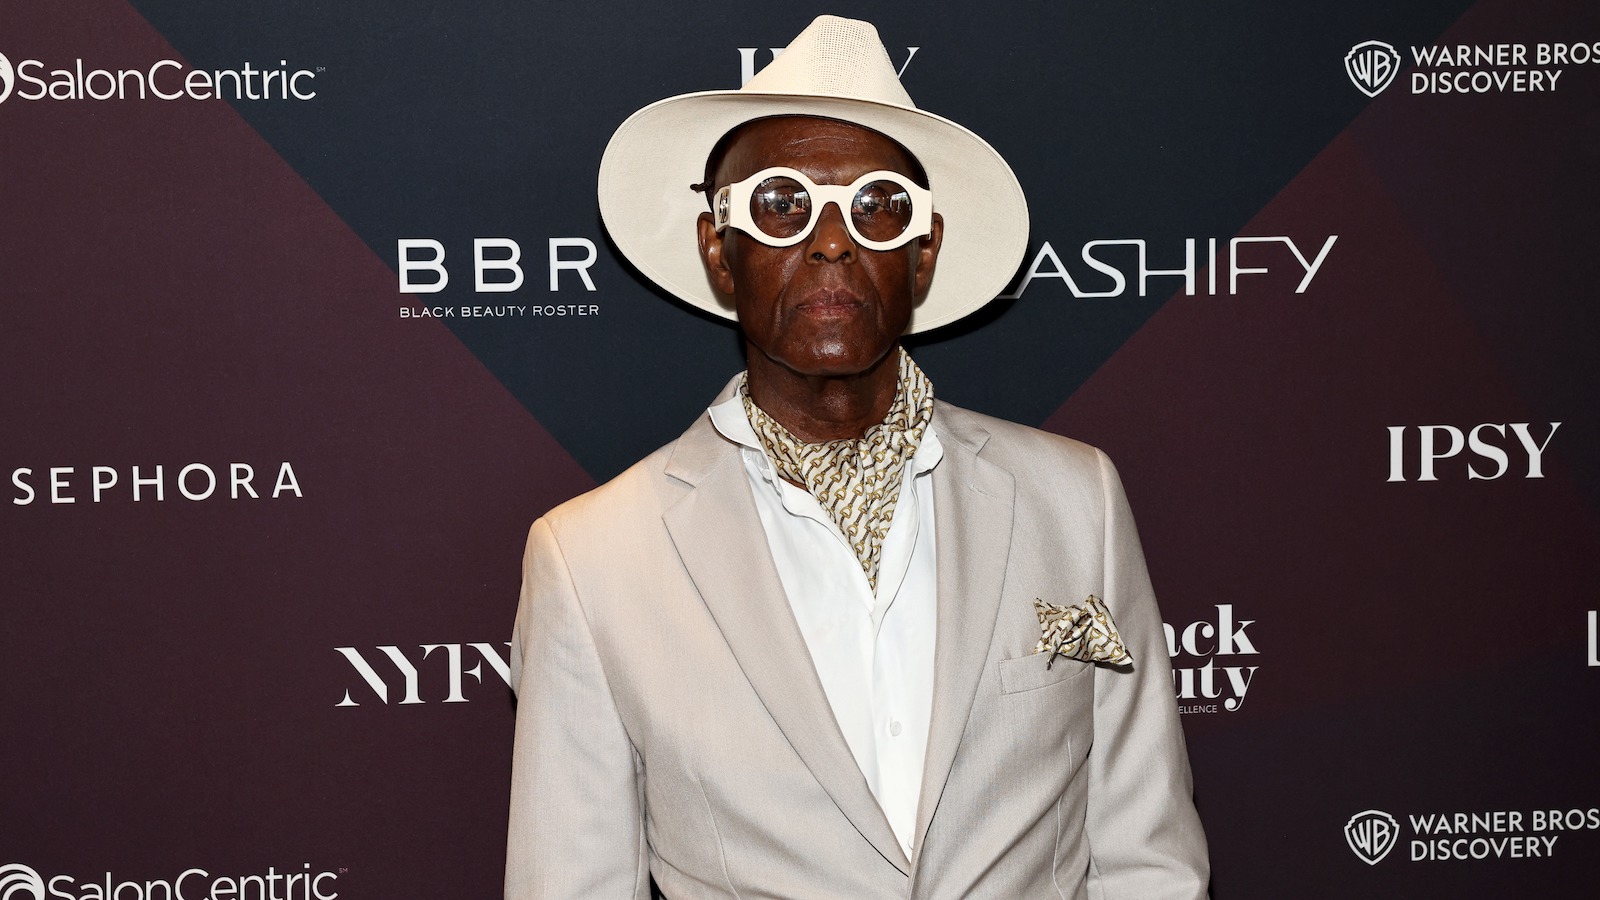 Designer Dapper Dan just made history. Here are some of his iconic looks.